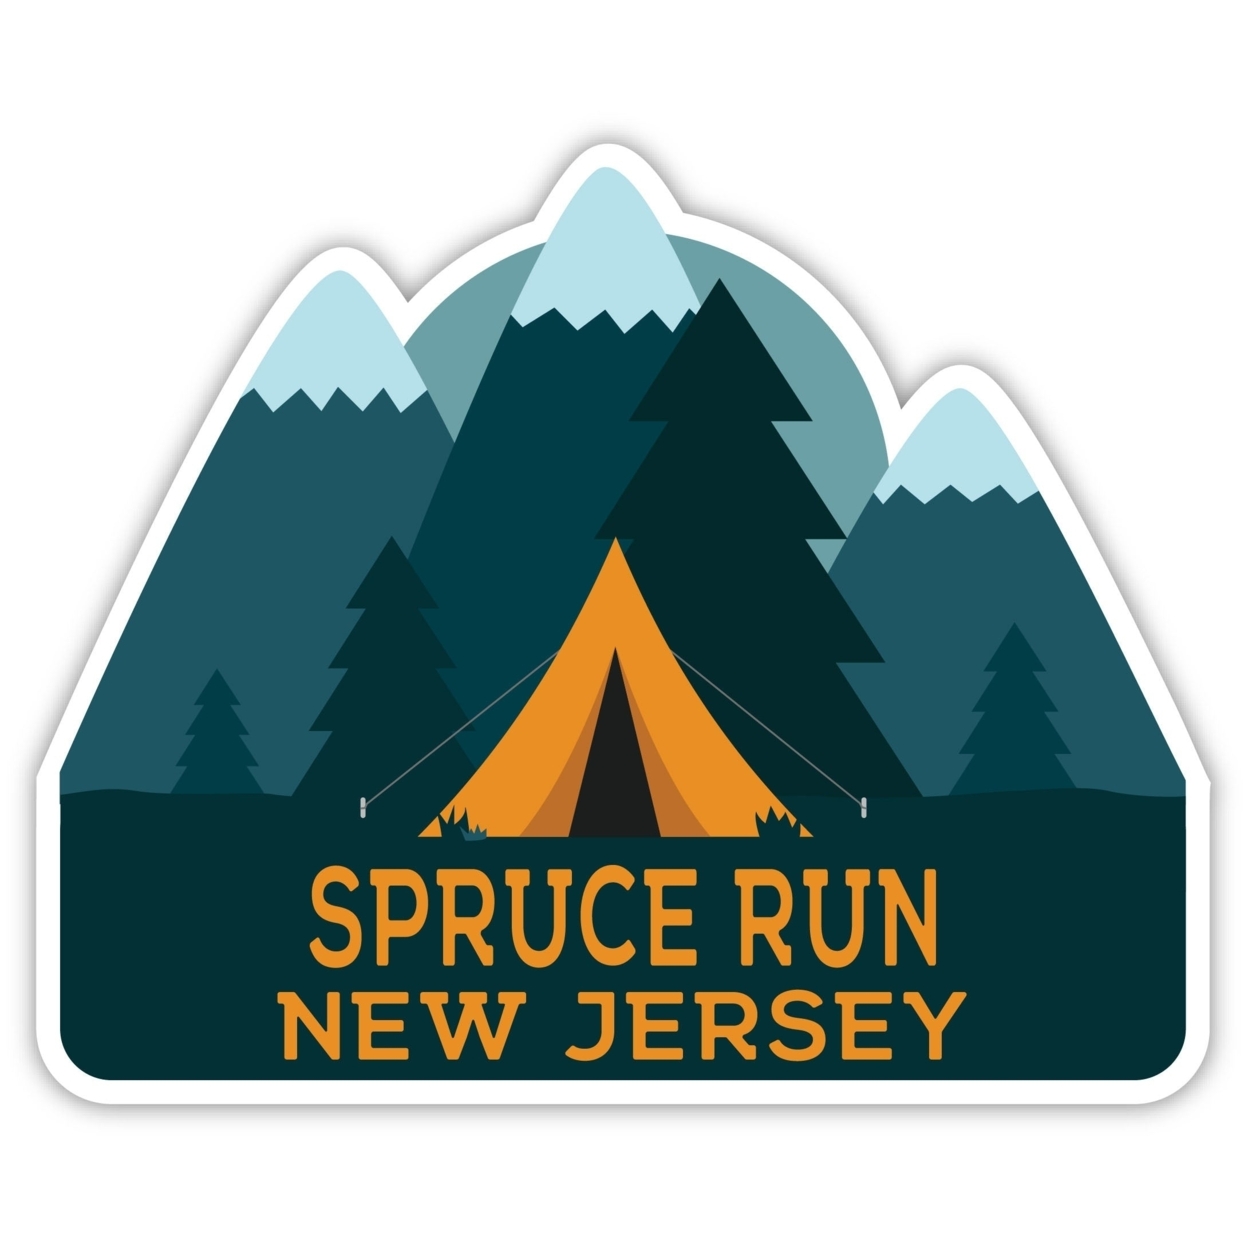 Spruce Run New Jersey Souvenir Decorative Stickers (Choose Theme And Size) - Single Unit, 4-Inch, Tent